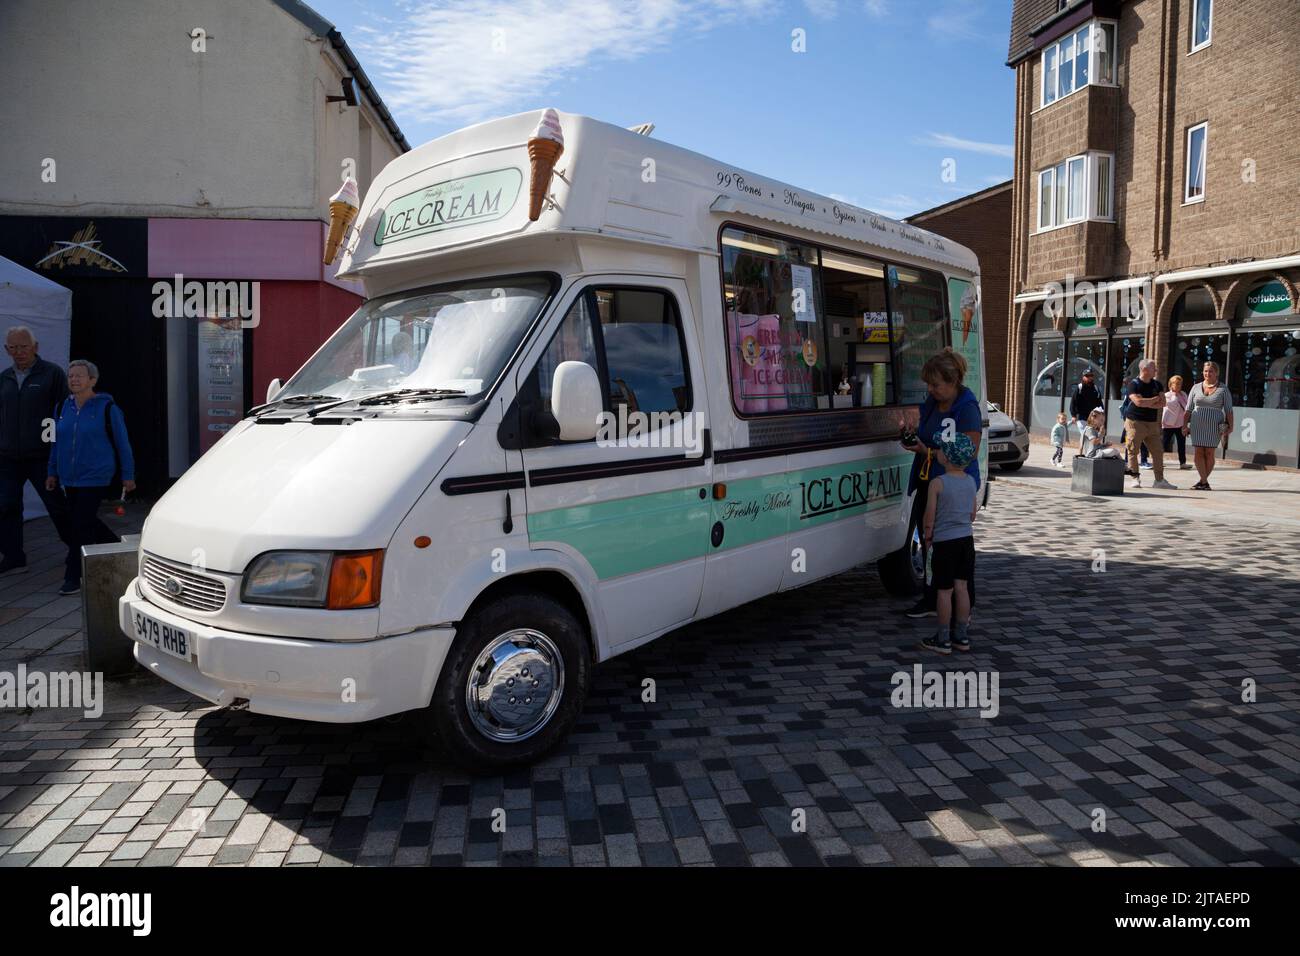 Ford van selling icecream in Colquhoun Square, Helensburgh, Scotland Stock Photo